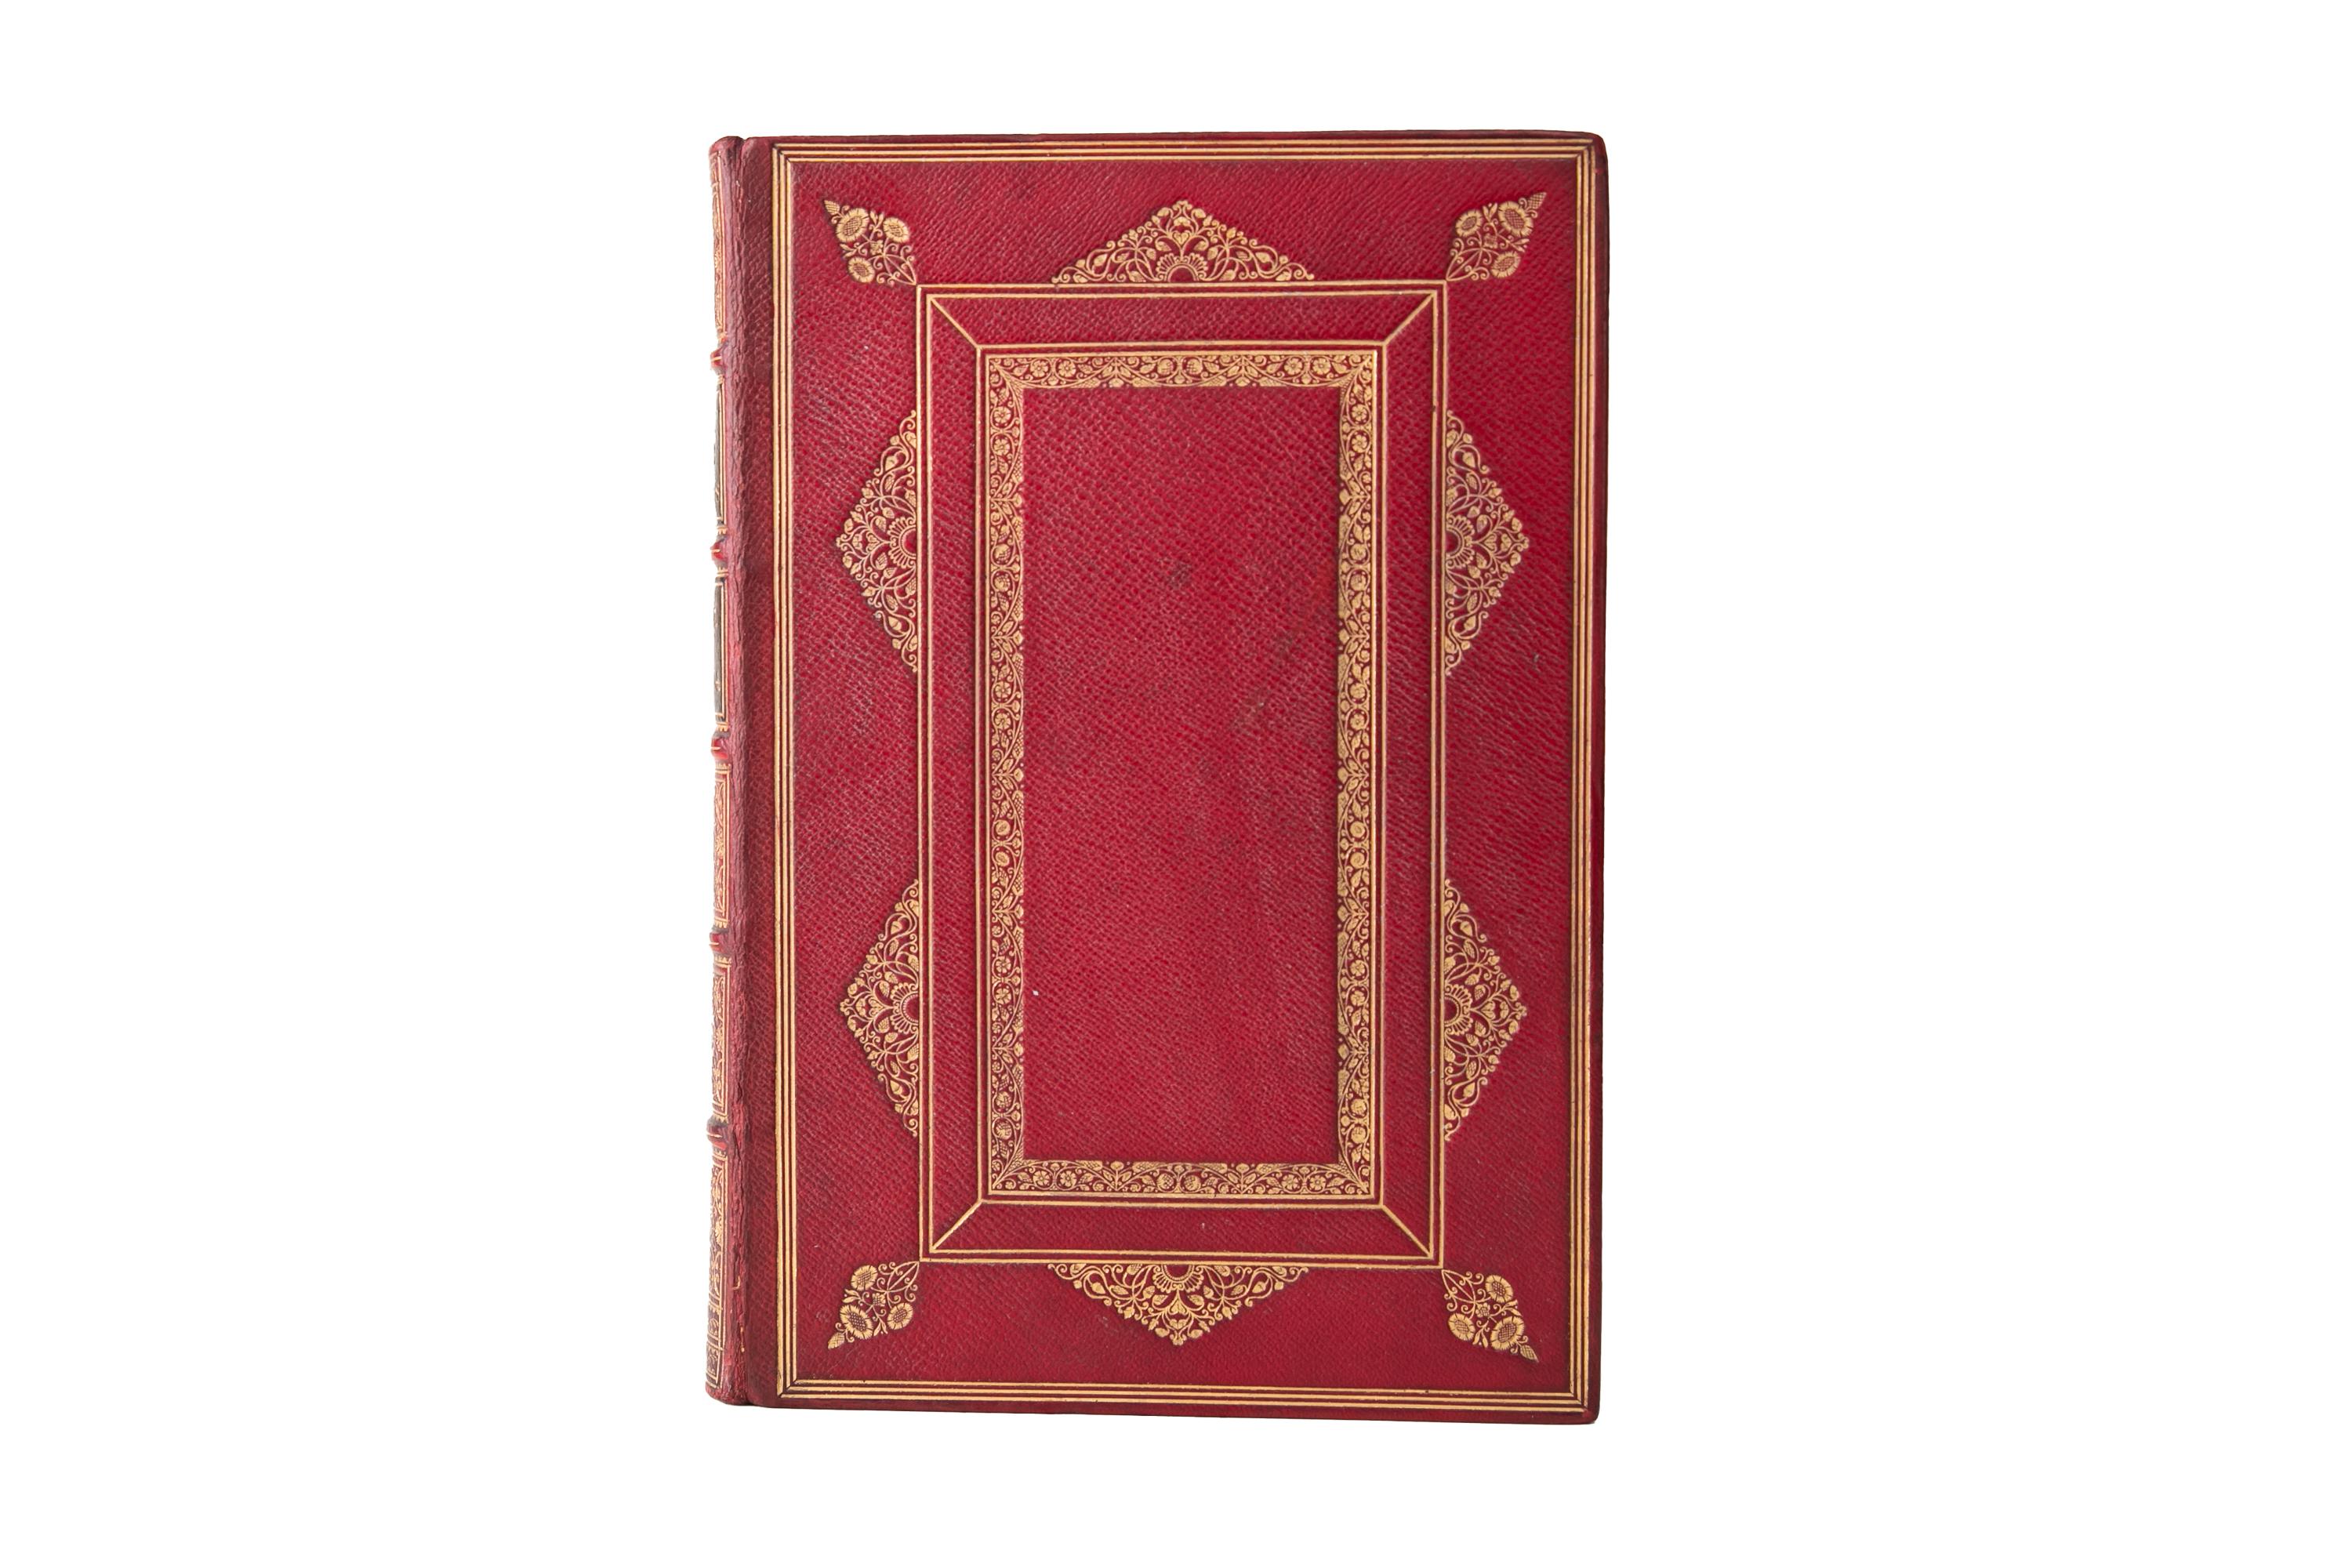 6 Volumes. Edmund Lodge, Portraits of Illustrious Personages of Great Britain. Bound in full red morocco. The Covers and raised band spines display ornate gilt-tooling with black morocco labels. All edges are gilt with gilt-tooled turn-ins.